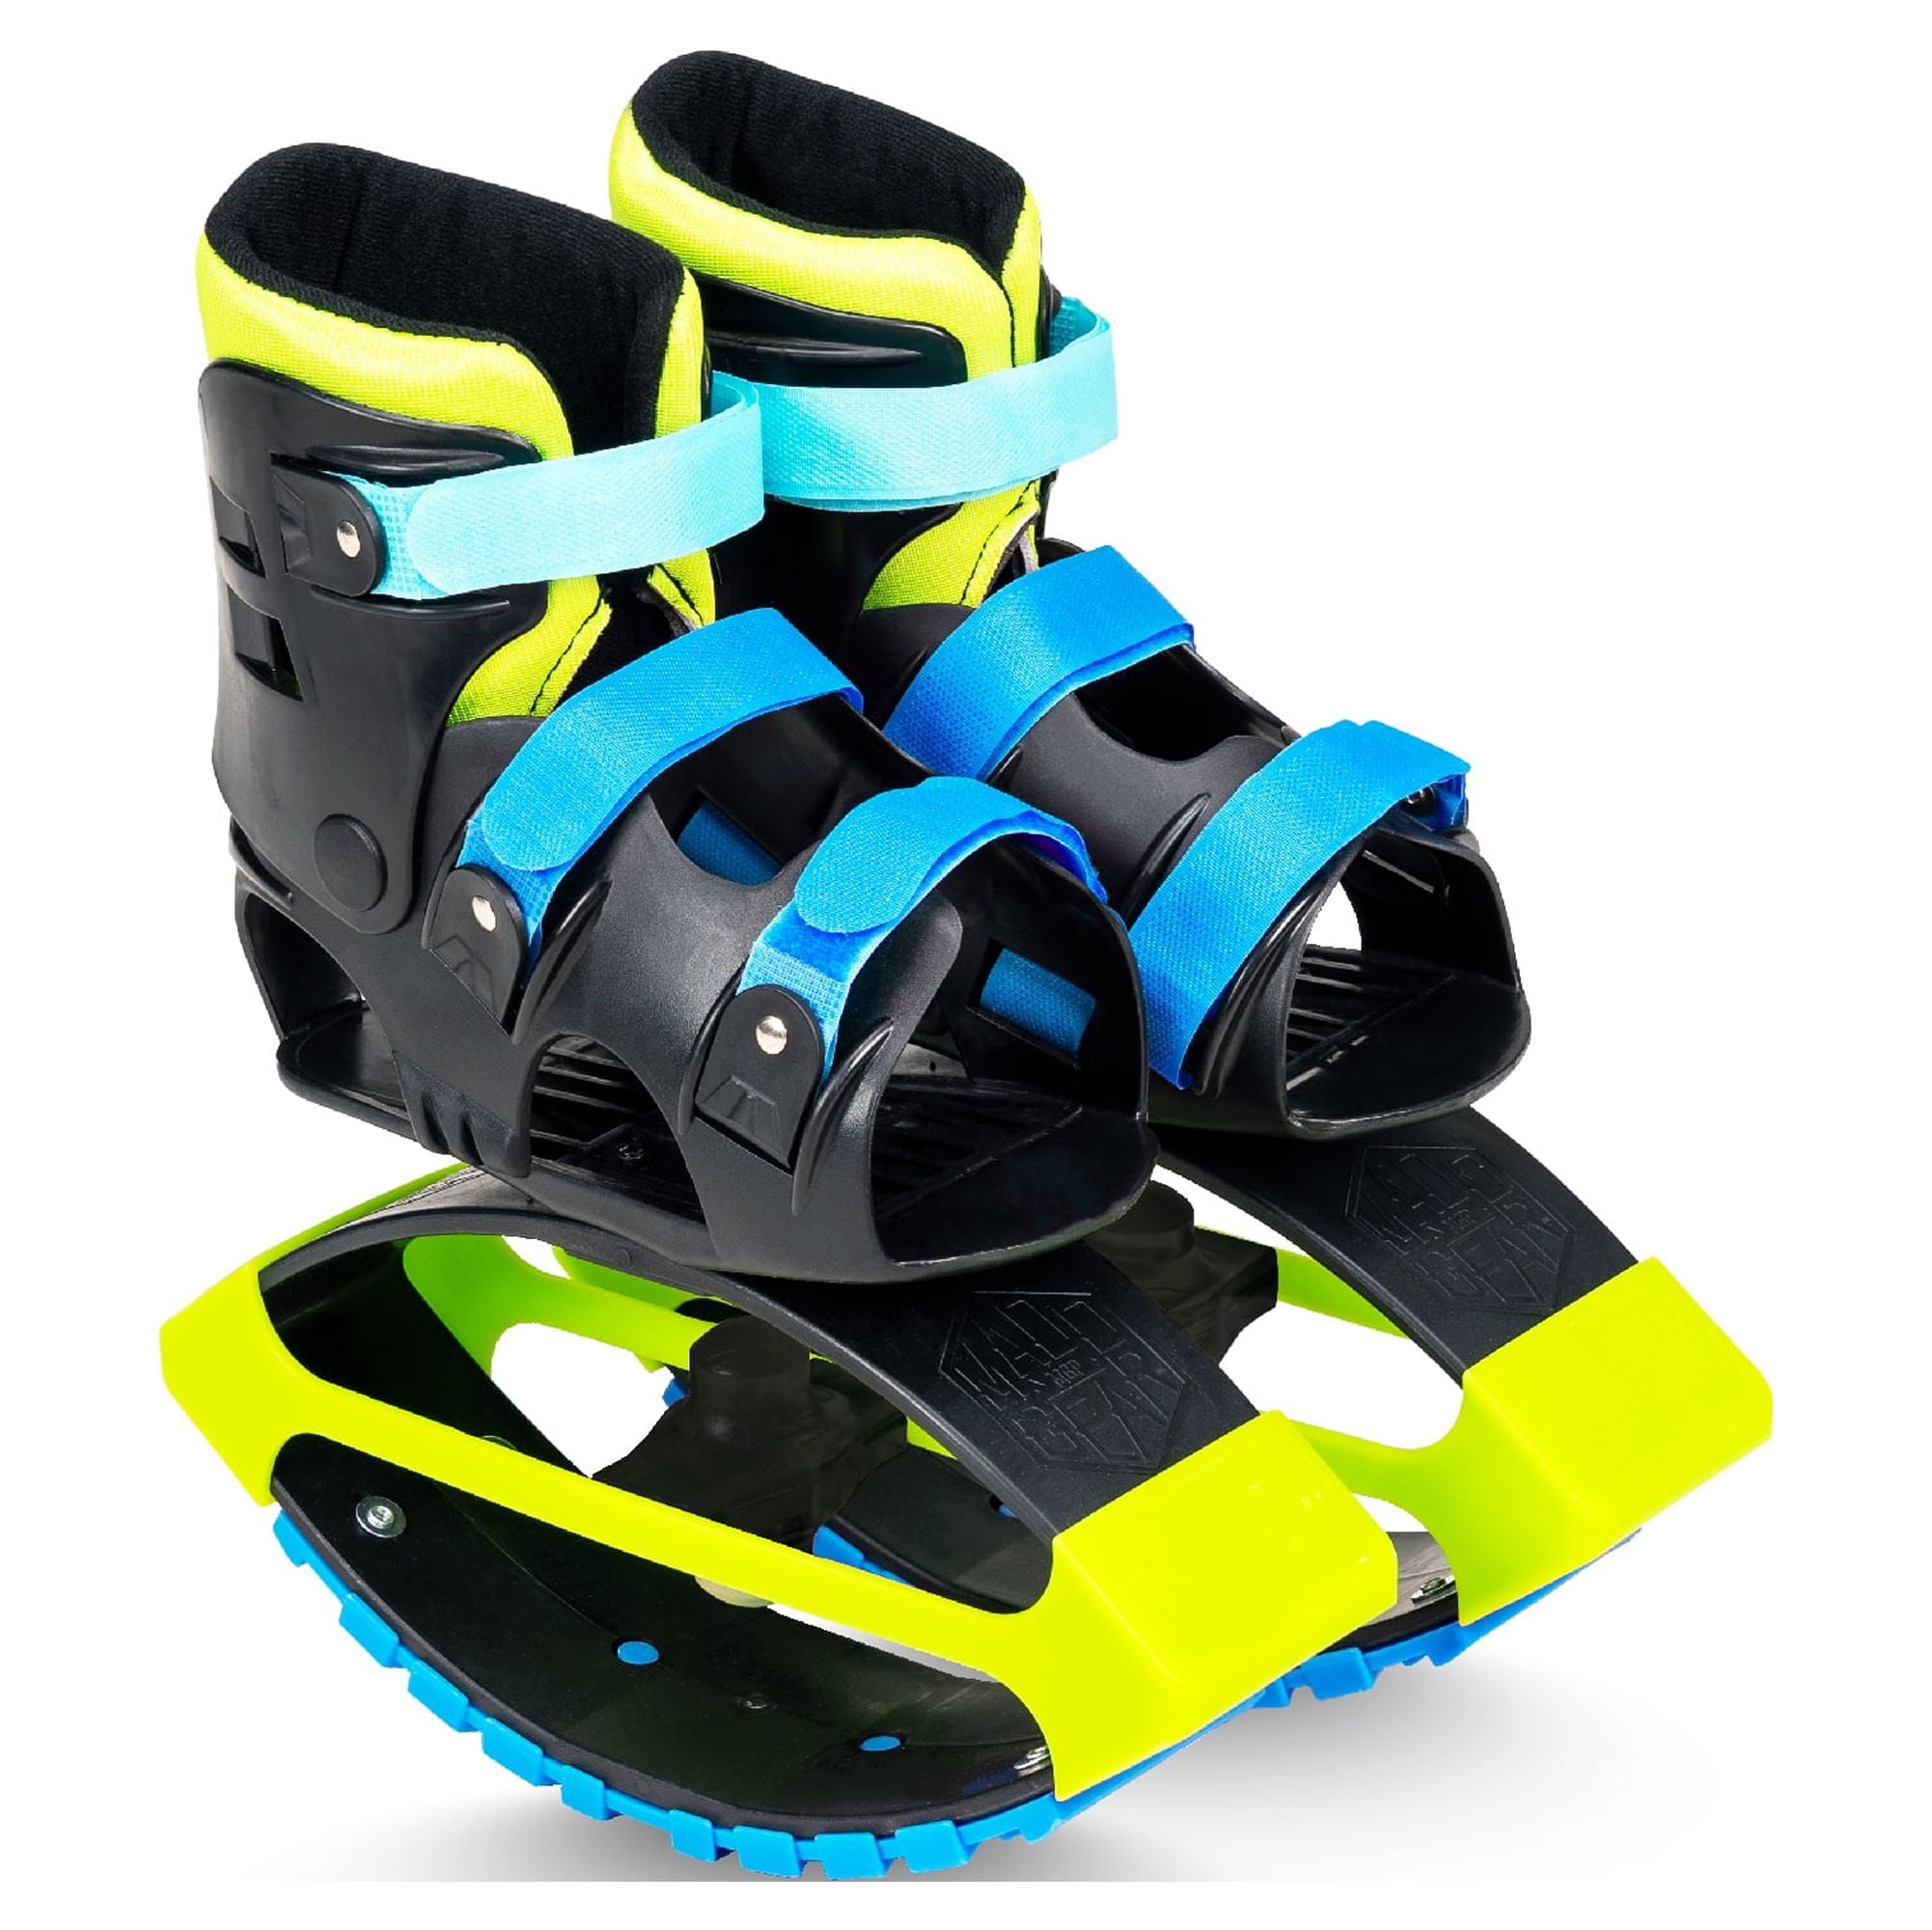 Getting fit in a fun way with Kangoo Jump rebound shoes 